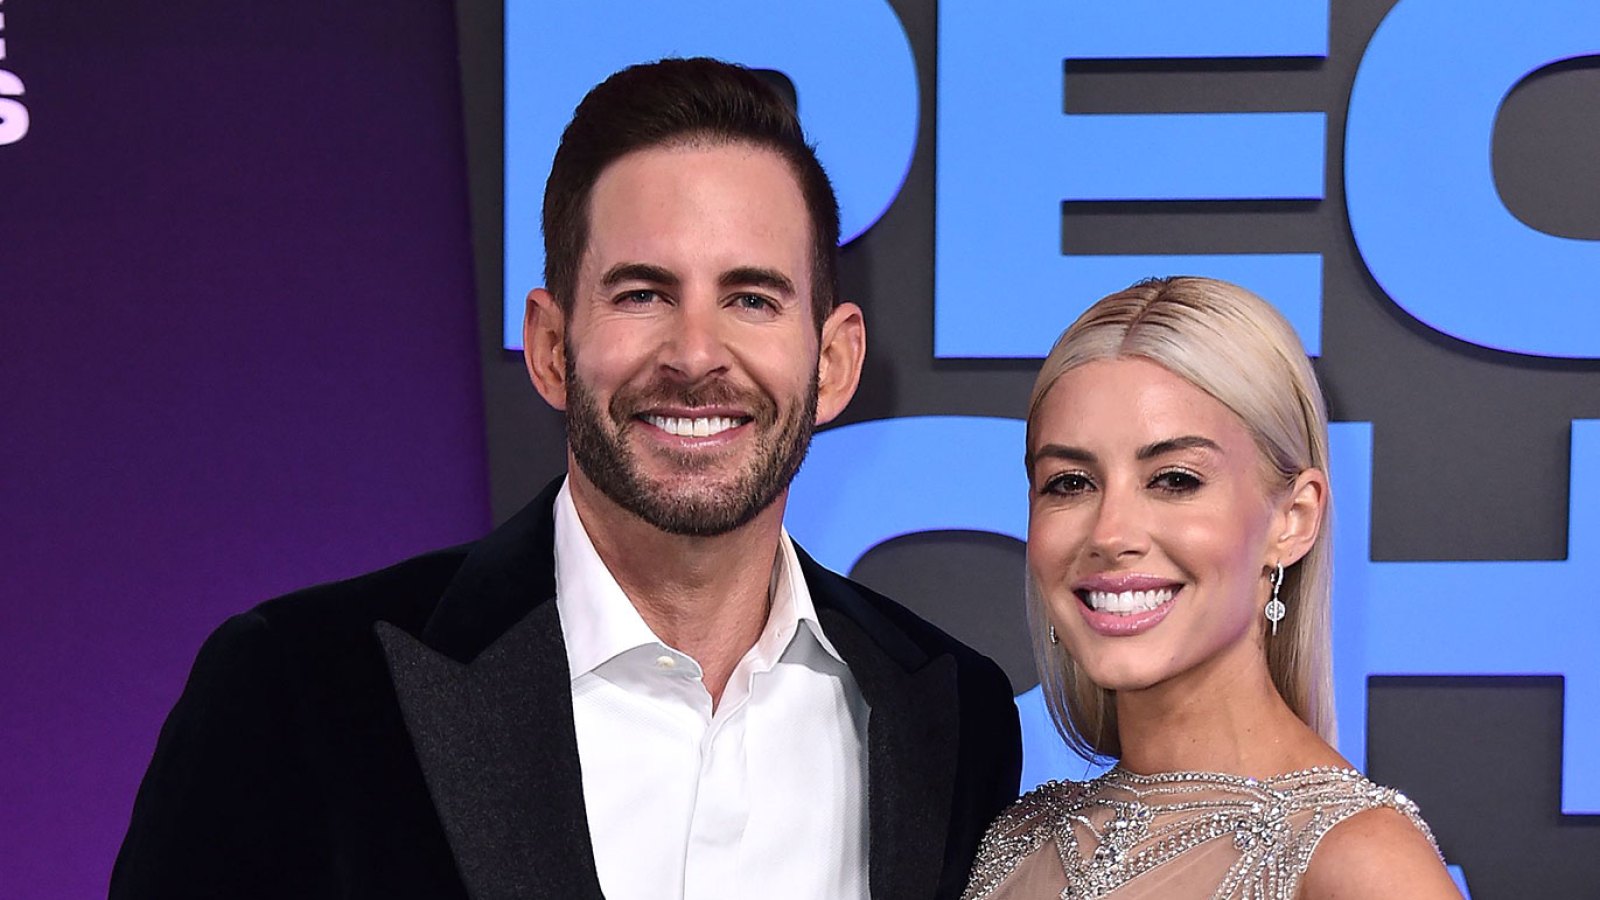 Heather Rae El Moussa Best Quotes About Motherhood and Parenting With Tarek El Moussa 3